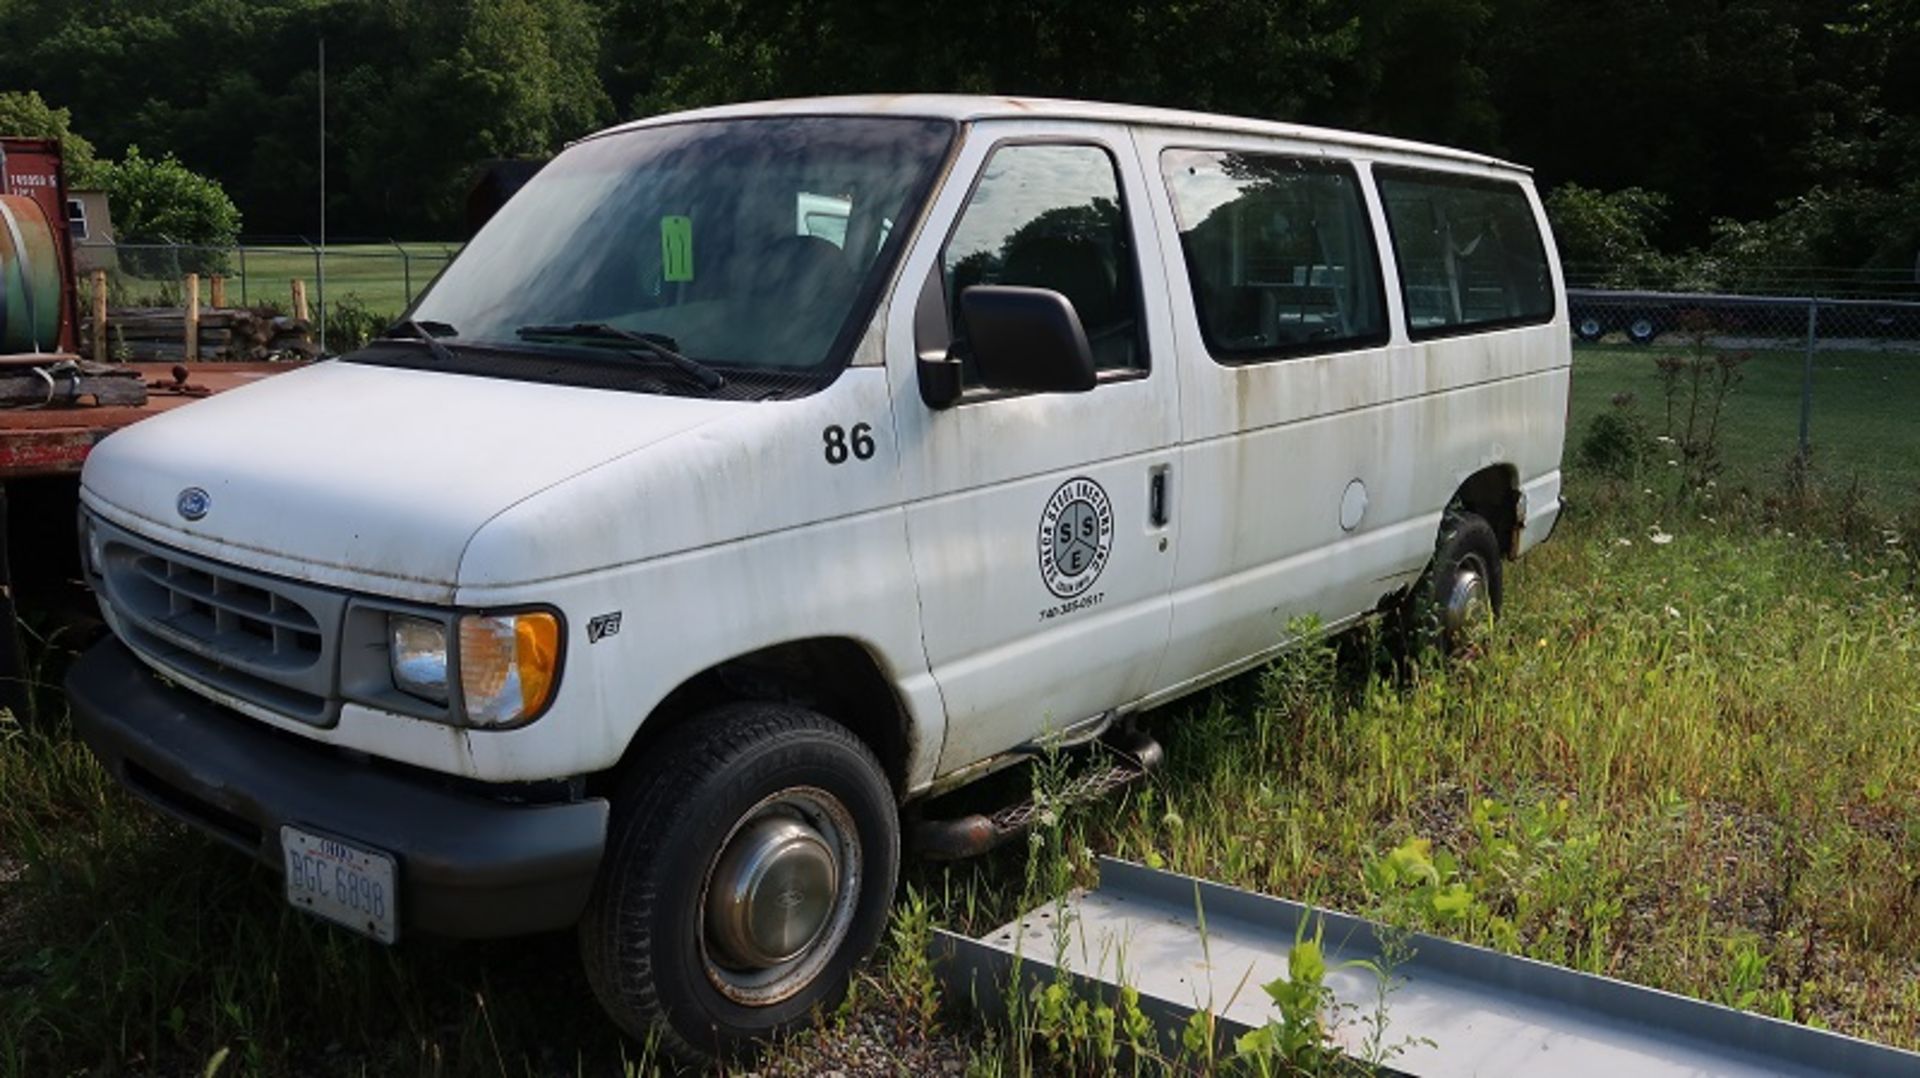 Ford Cargo Van with Triton V8 (1997) Mileage: 312,790, VIN: 1FBHE1L2VHA92725